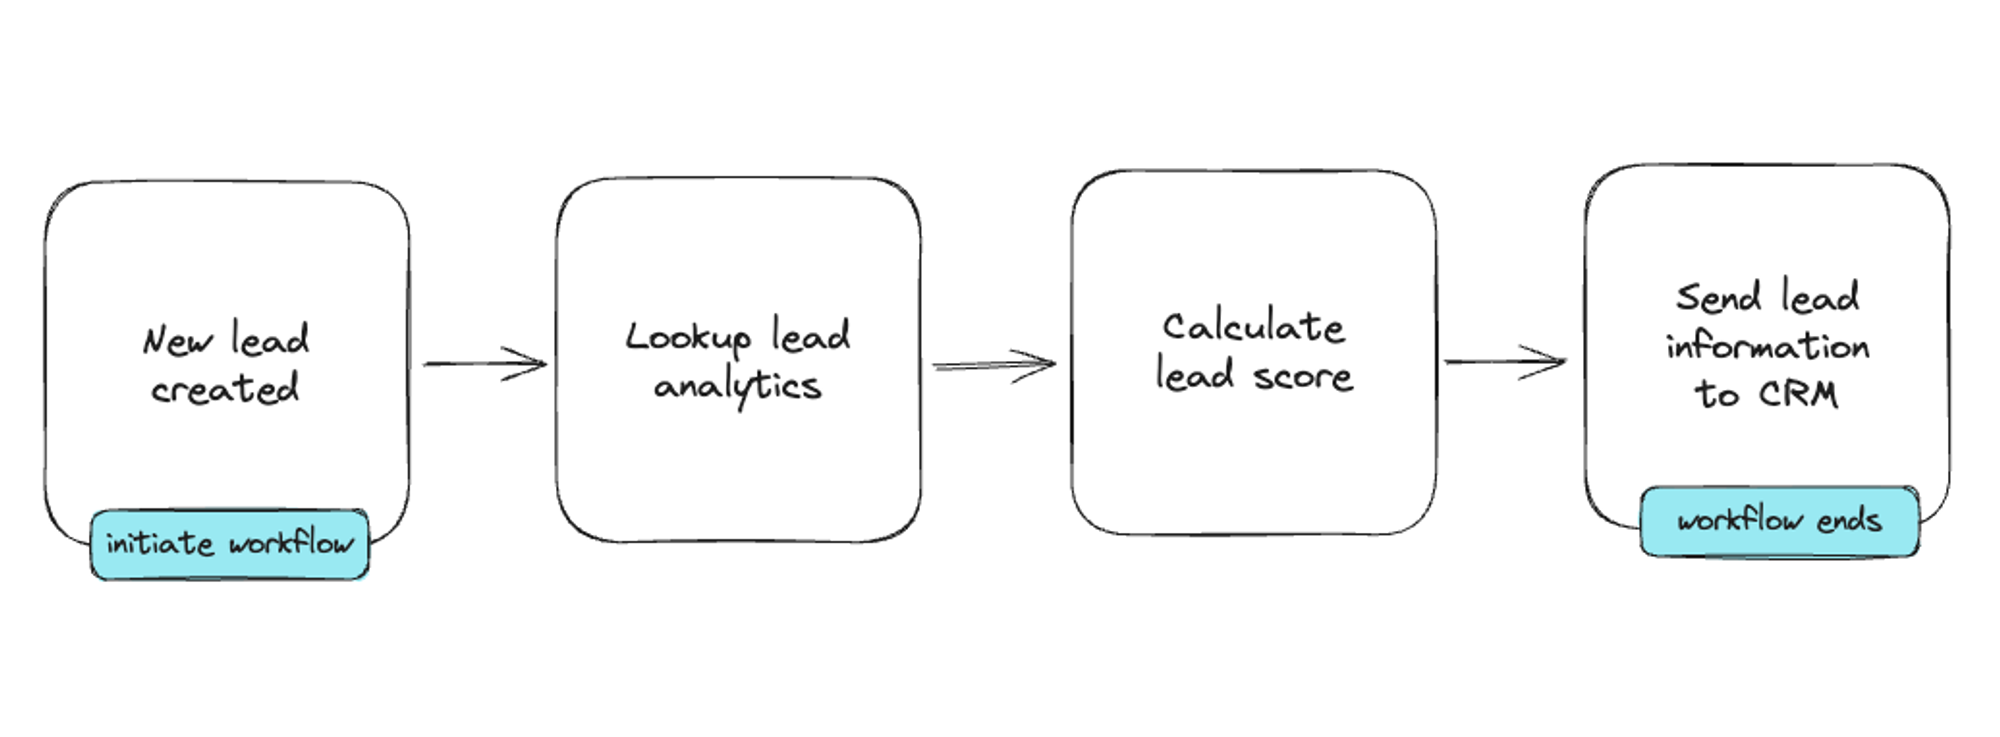 This low-code example allows you to build a lead scoring system through a drag and drop interface.